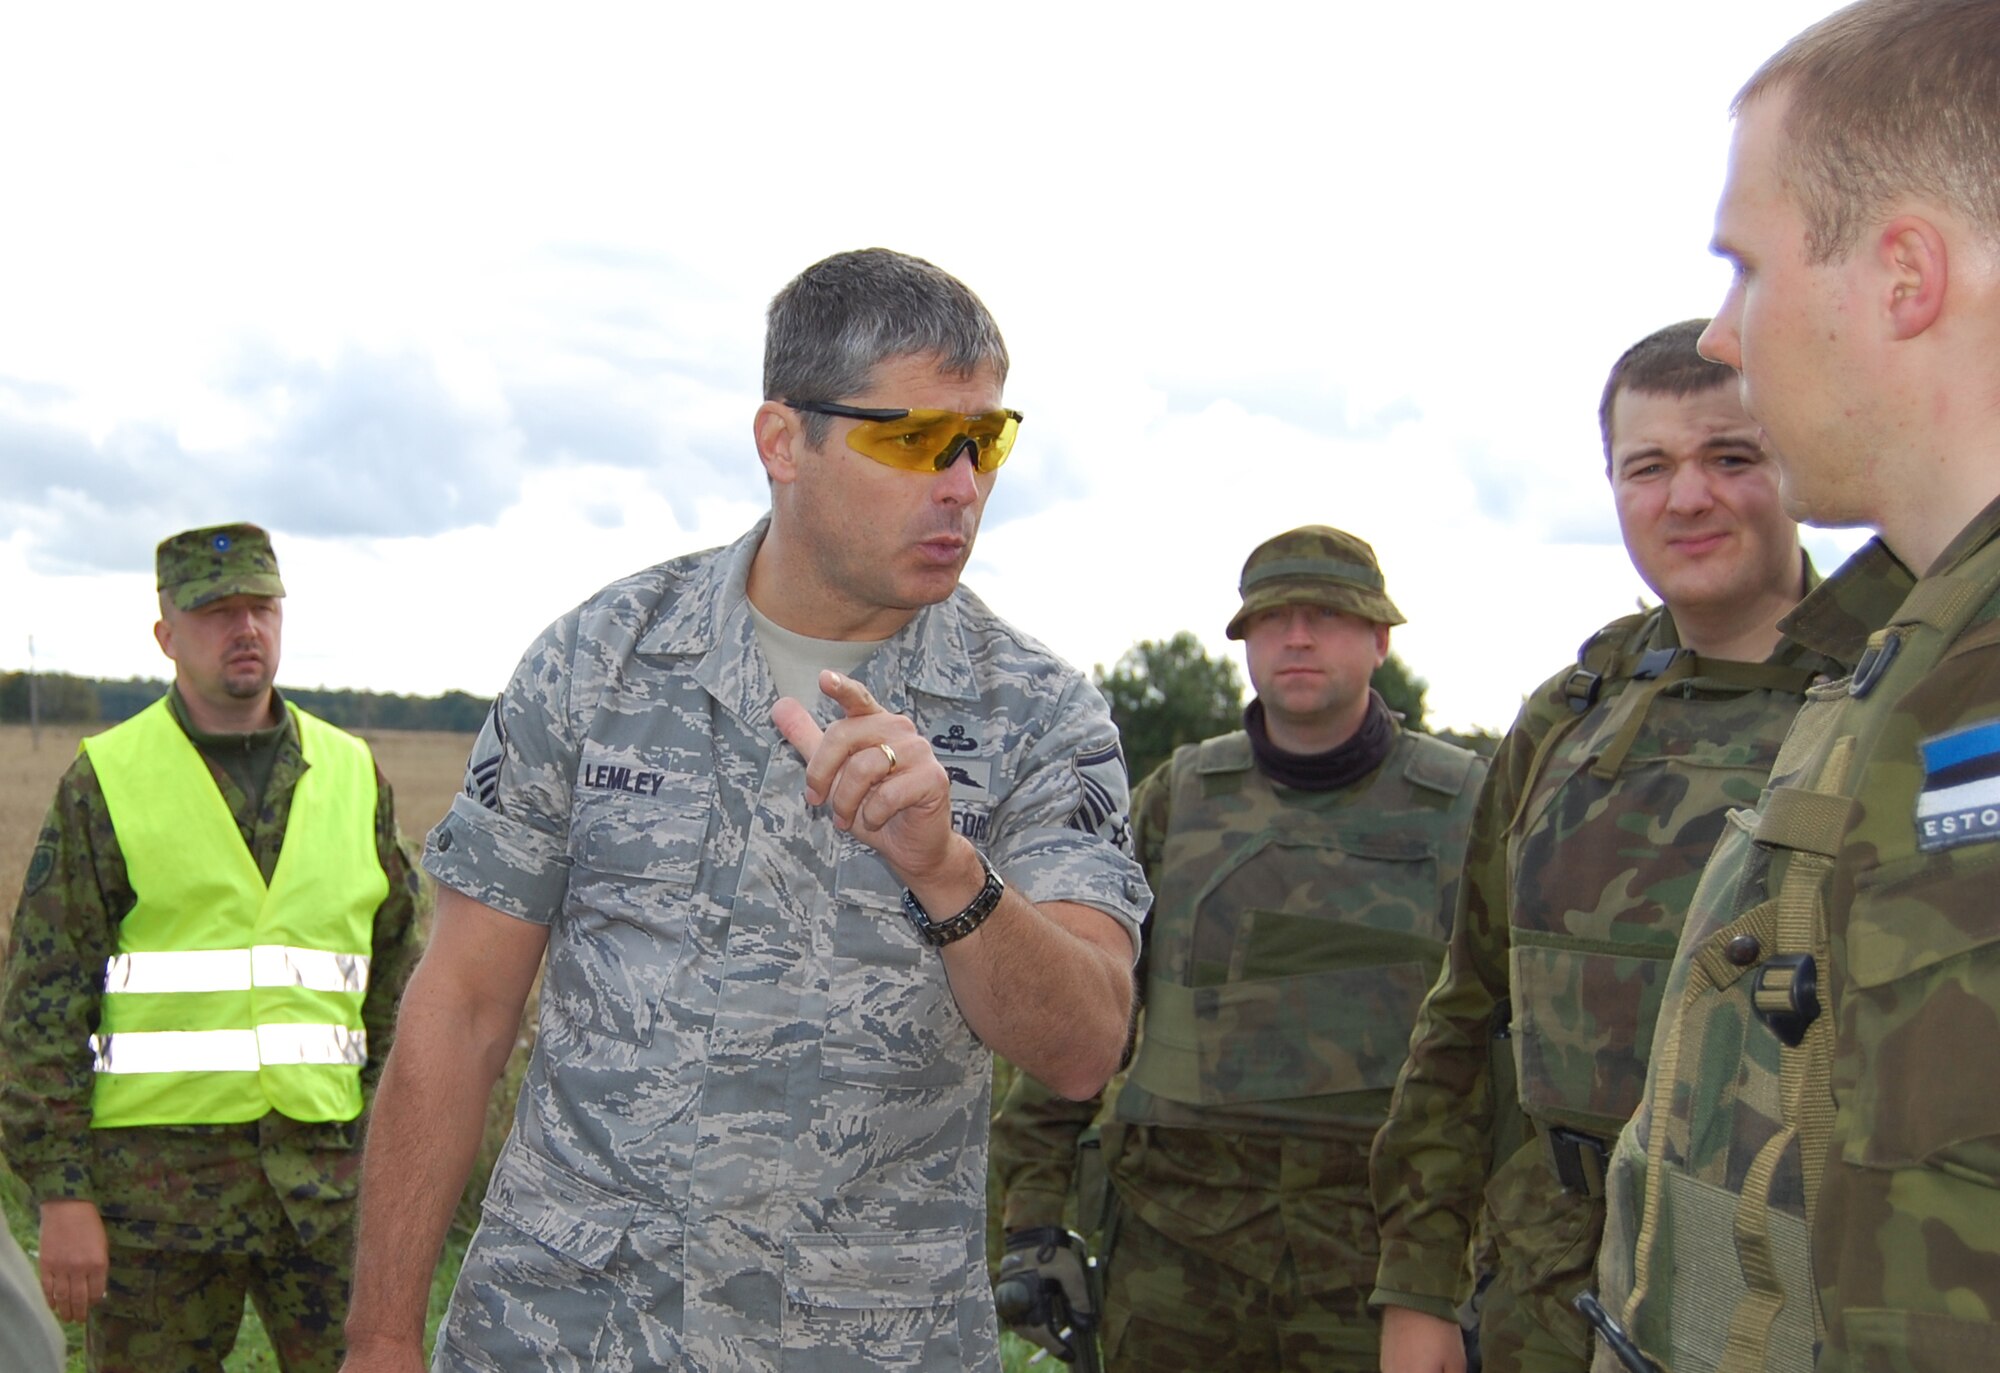 Master Sgt. Jay Lemley, a Joint Terminal Attack Controller assigned to USAFE’s Operations Directorate Close Air Support Branch, provides feedback to Estonian Forward Air Controllers after completing day two of NATO’s Baltic Region Training Event IV Alpha near Tallinn, Estonia Tuesday. (U.S. Air Force Photo by Master Sgt. Gino Mattorano)